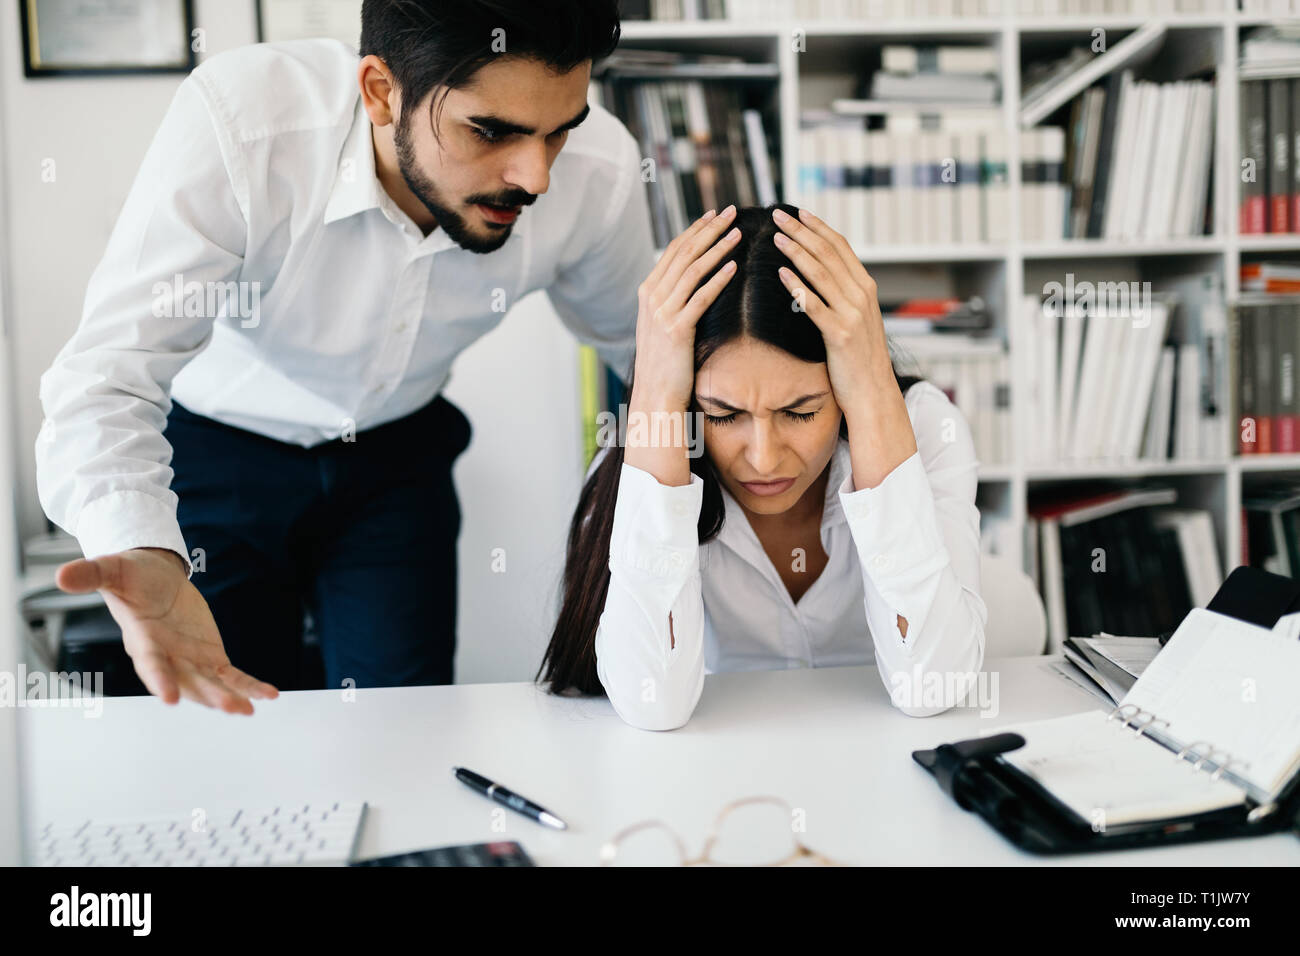 Businessman yelling at female colleague in office Stock Photo